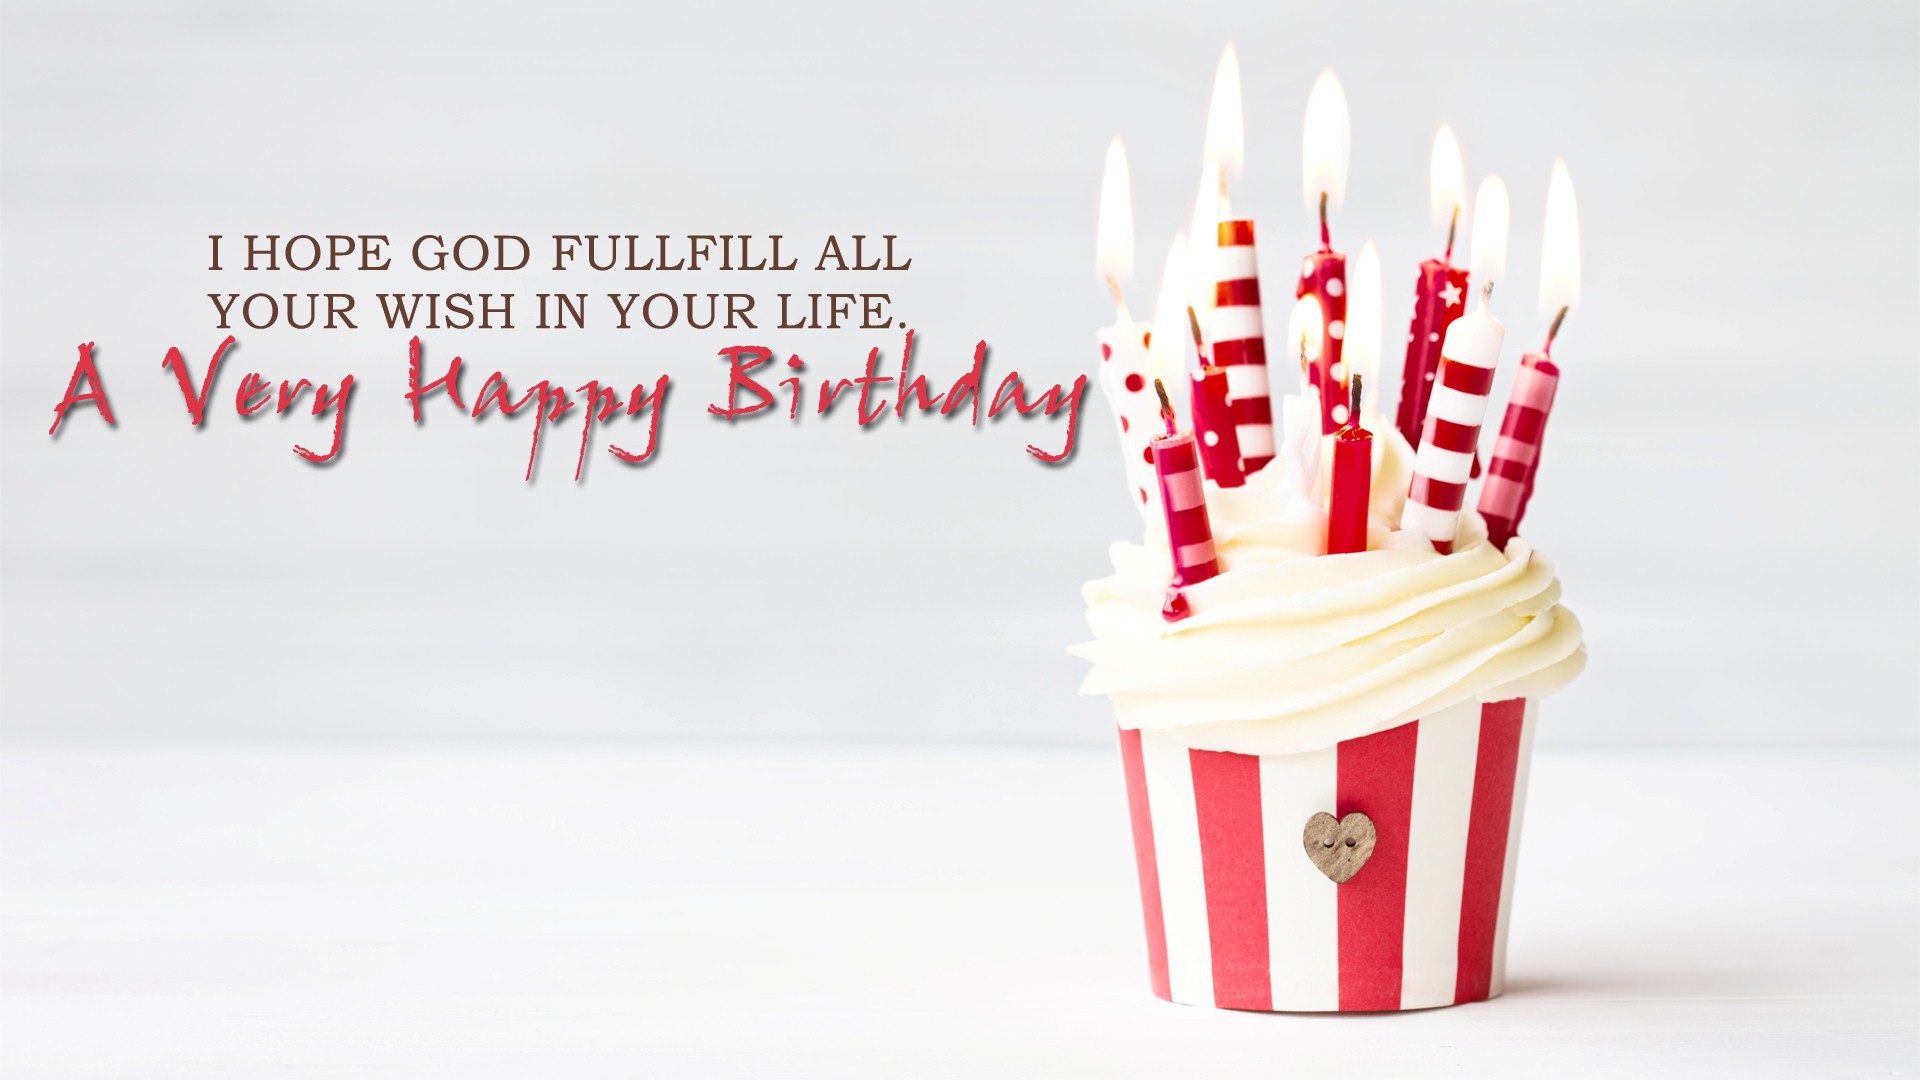 Birthday Photos Hd Free Download Wallpaper Backgrounds